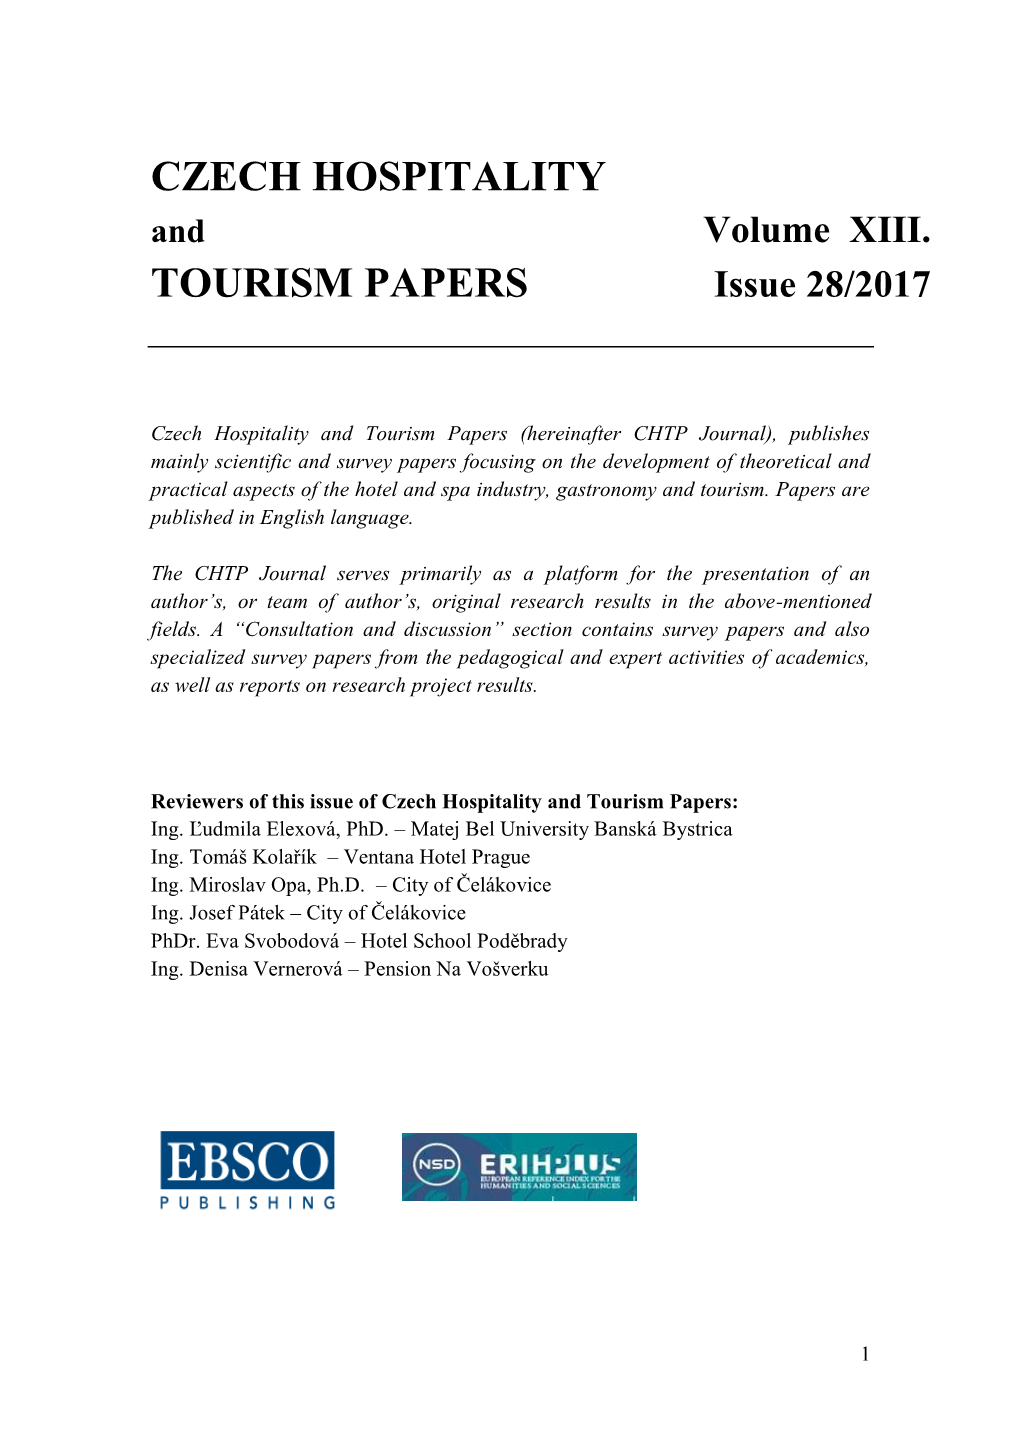 Czech Hospitality Tourism Papers